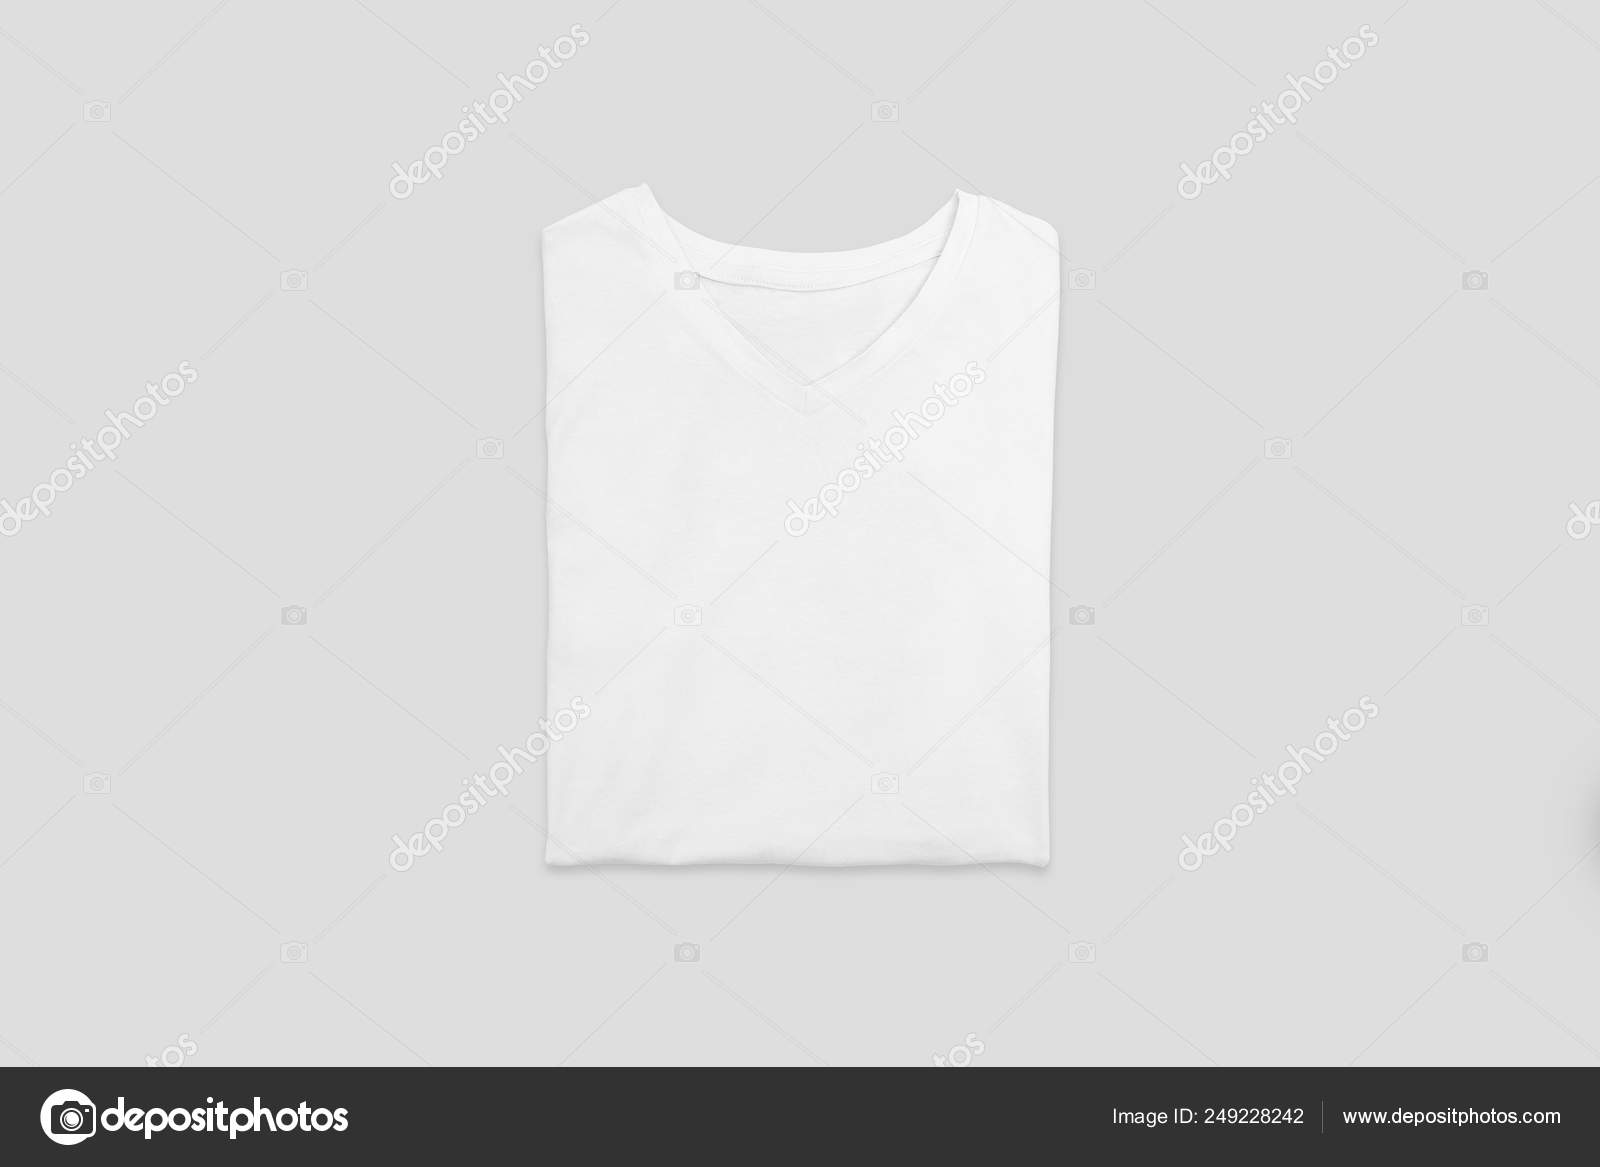 Download Folded Blank White Shirts Mock Soft Gray Background Front View Stock Photo Image By C Sabirio Mail Ru 249228242